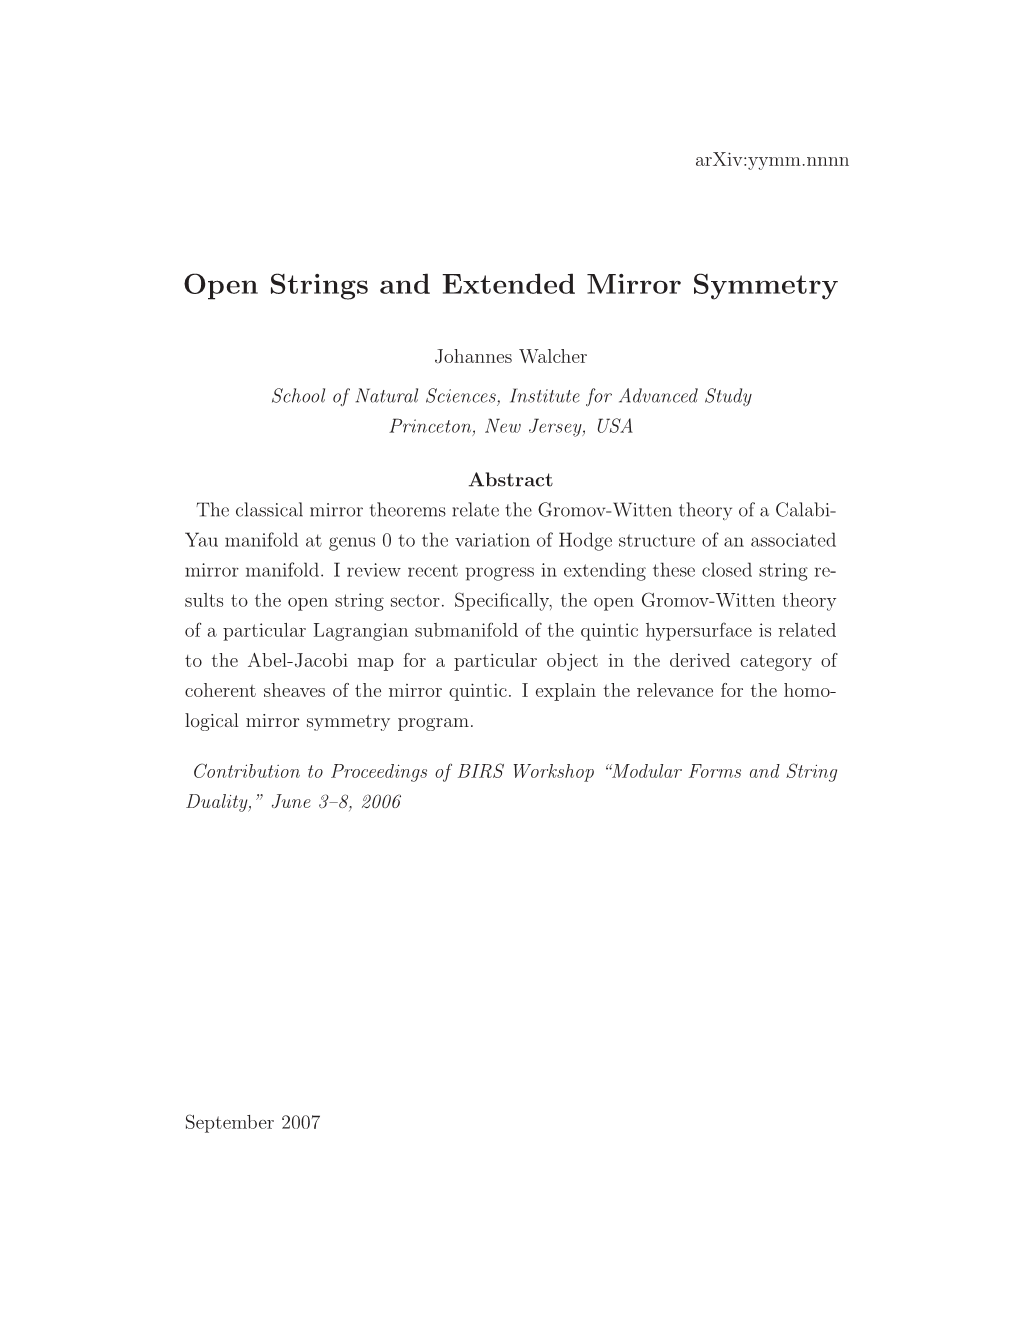 Open Strings and Extended Mirror Symmetry